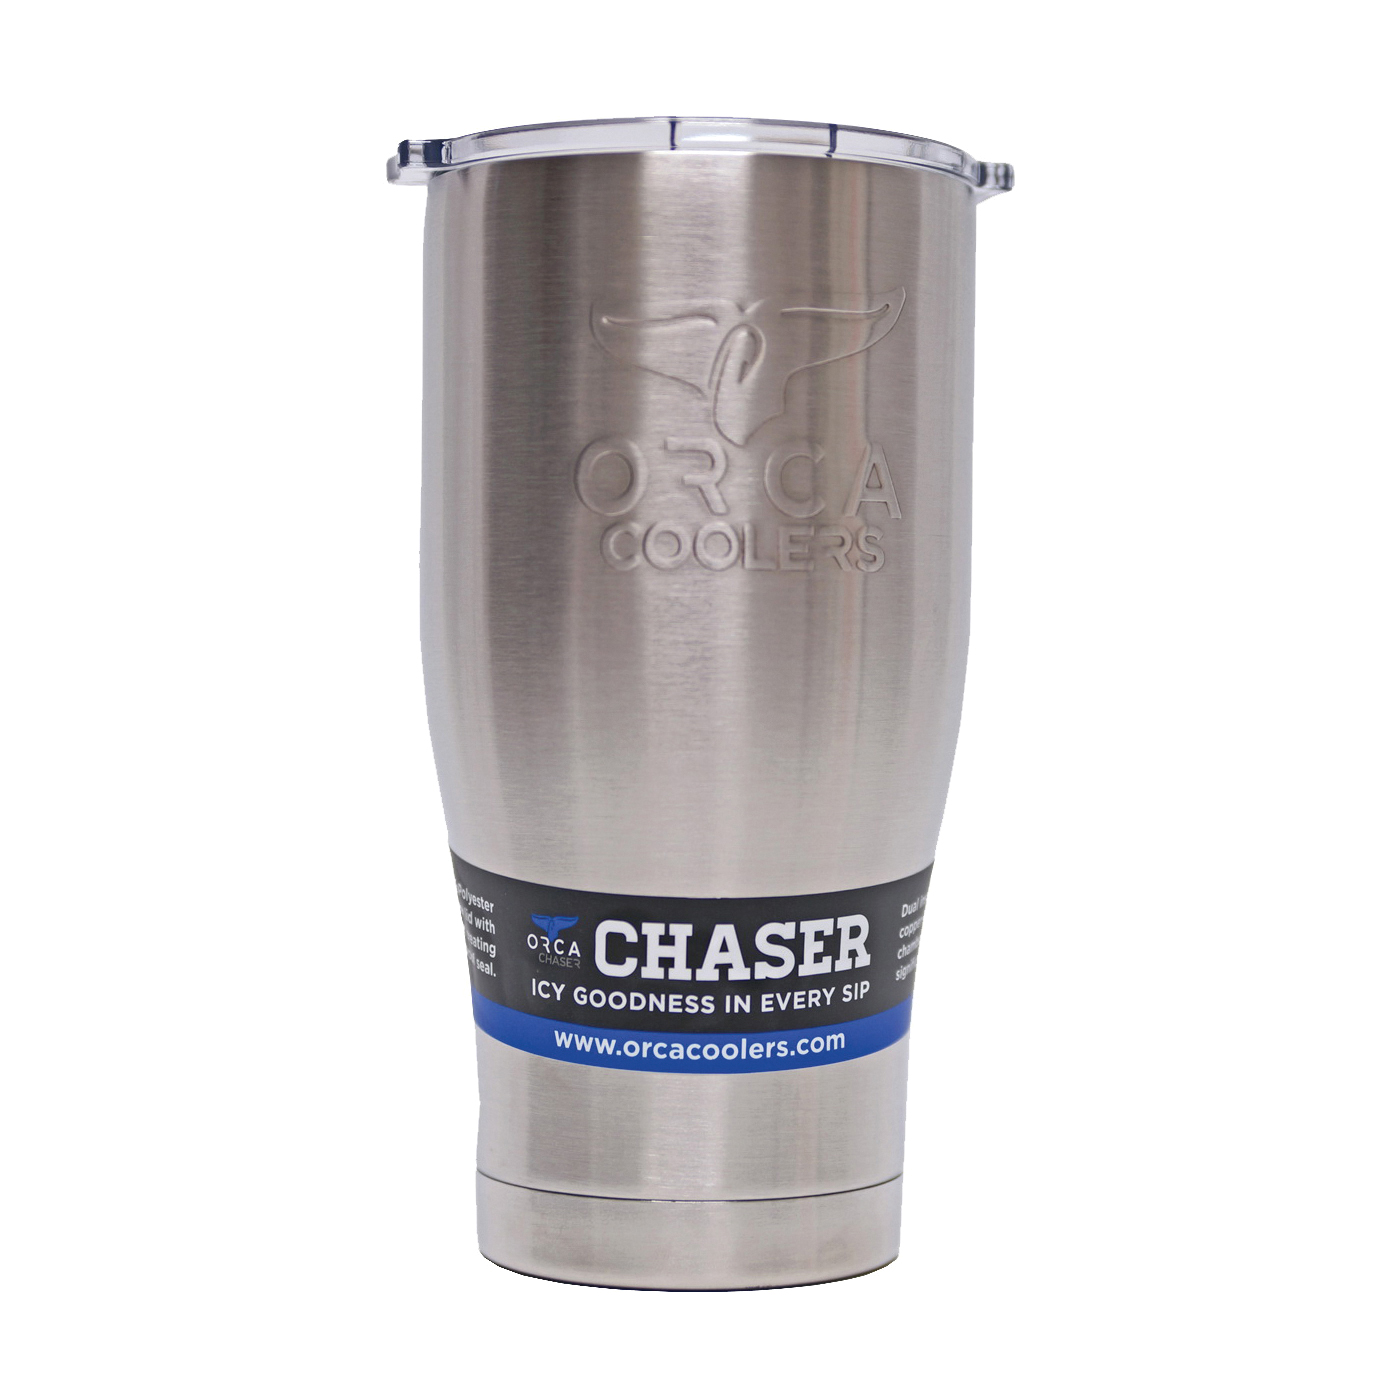 Chaser Series ORCCH27 Tumbler, 27 oz, Stainless Steel